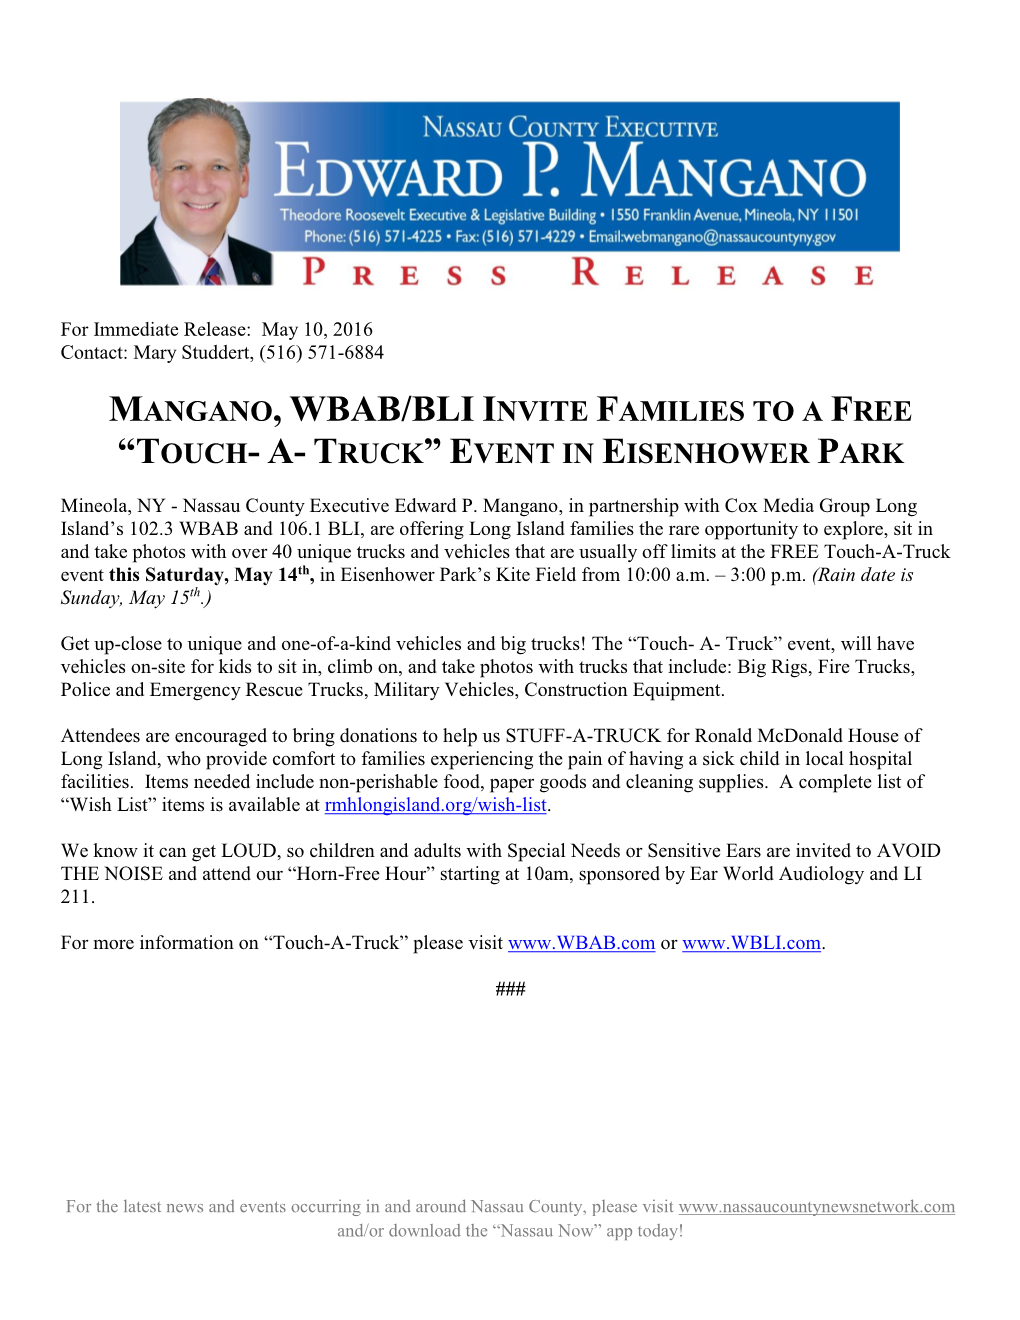 Mangano, Wbab/Bli Invite Families to a Free “Touch- A- Truck” Event in Eisenhower Park